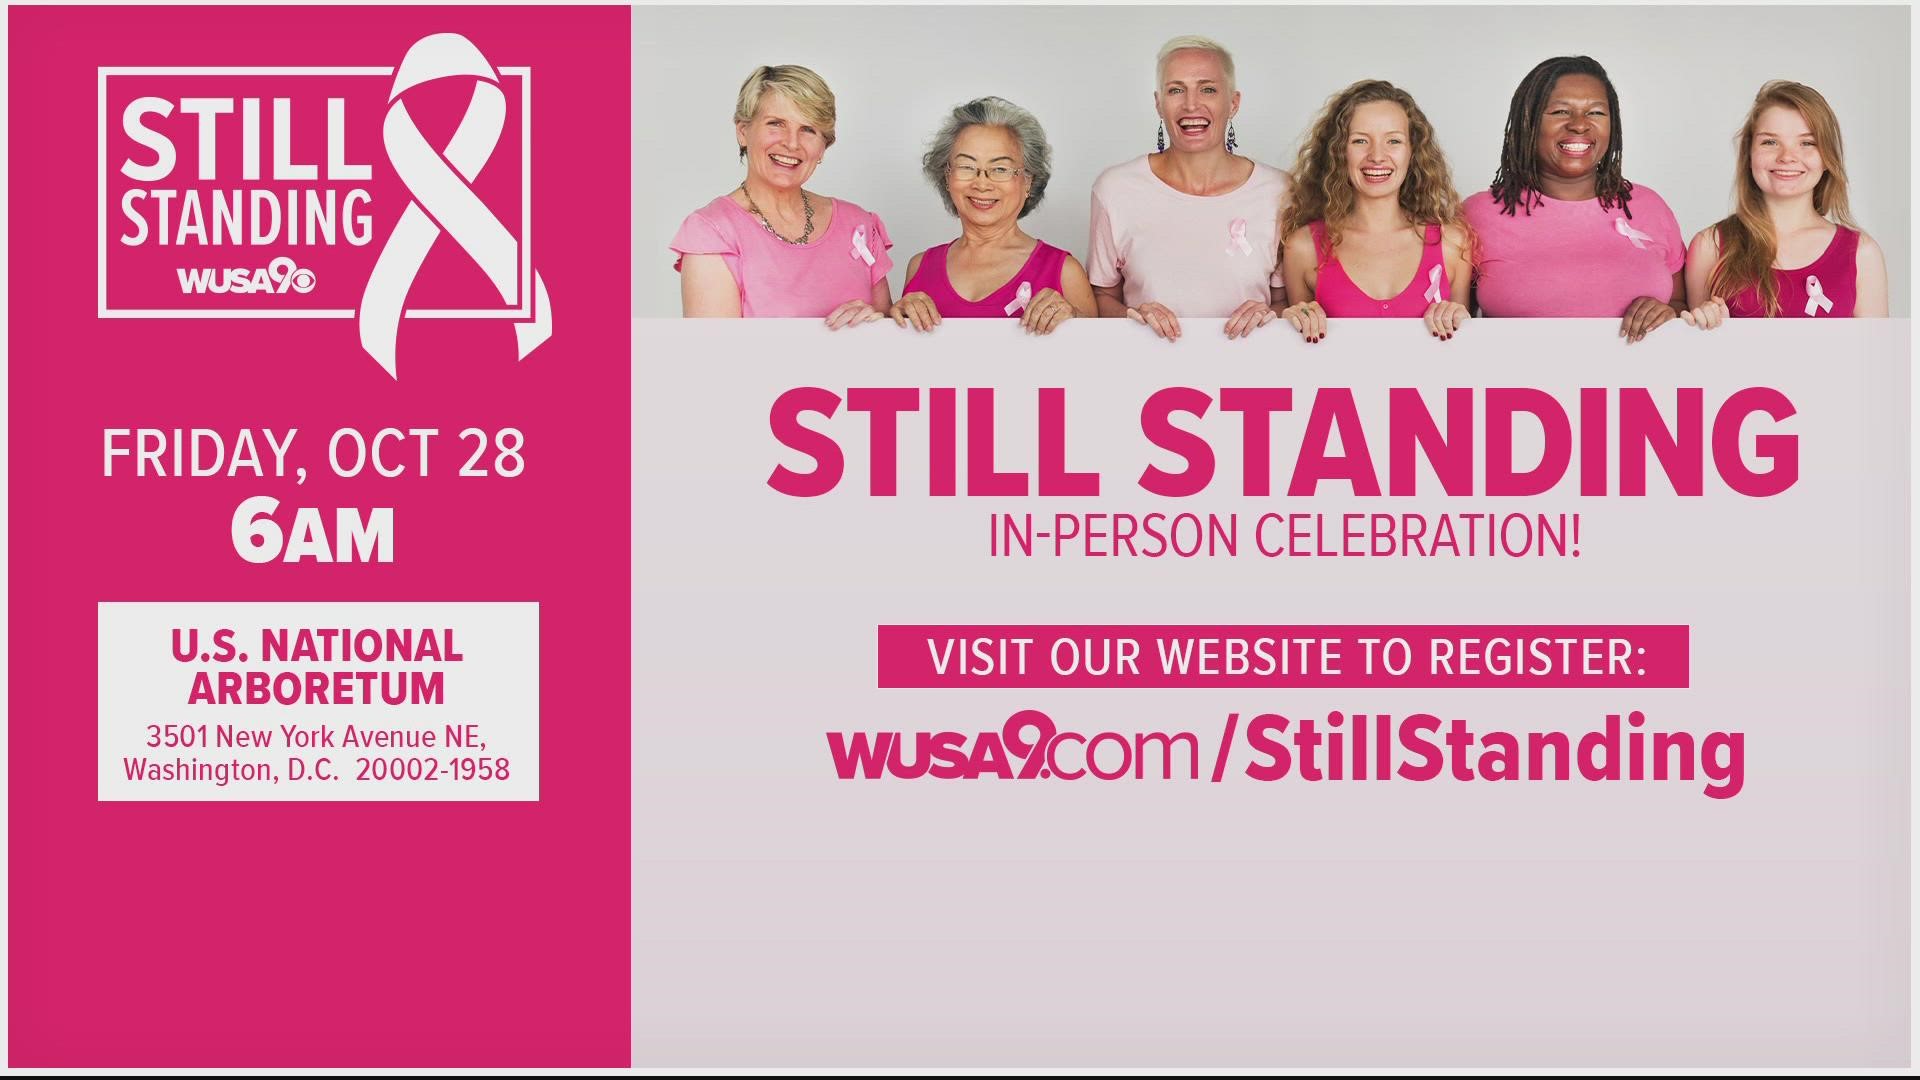 On Oct. 28, starting at 6 a.m. we are inviting breast cancer survivors and advocates to join WUSA9 for a special event featuring massages, line dancing and more!